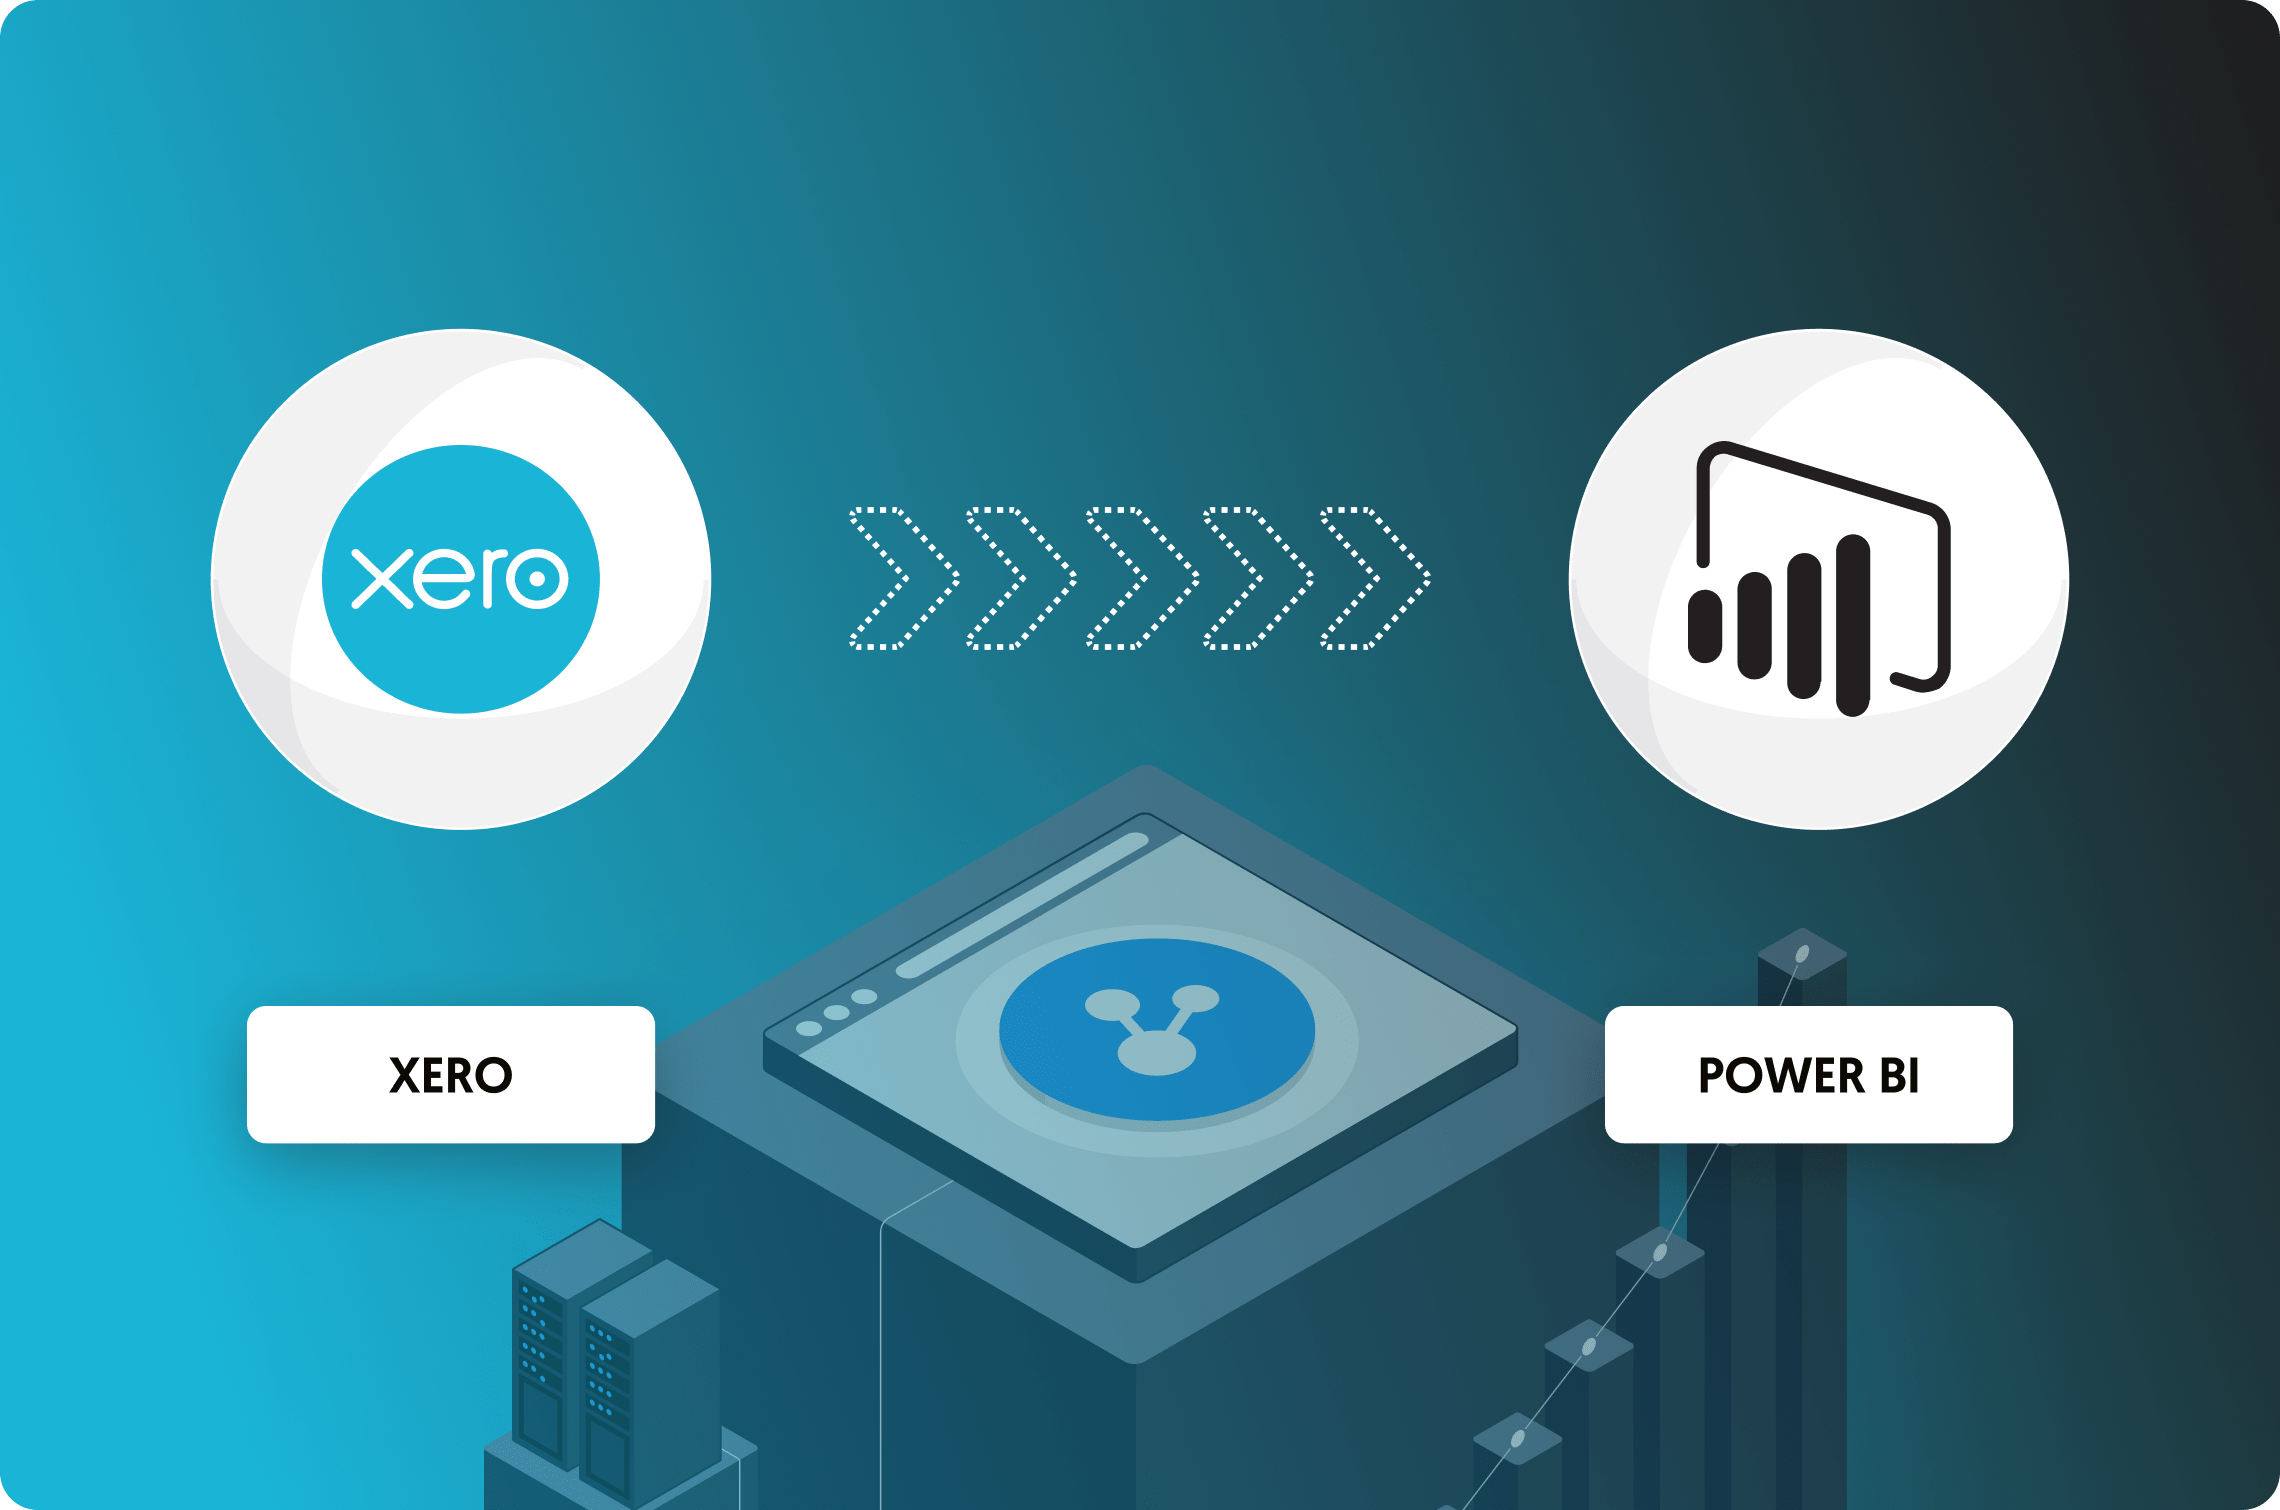 How to Connect Xero to Power BI With Dataddo for Free